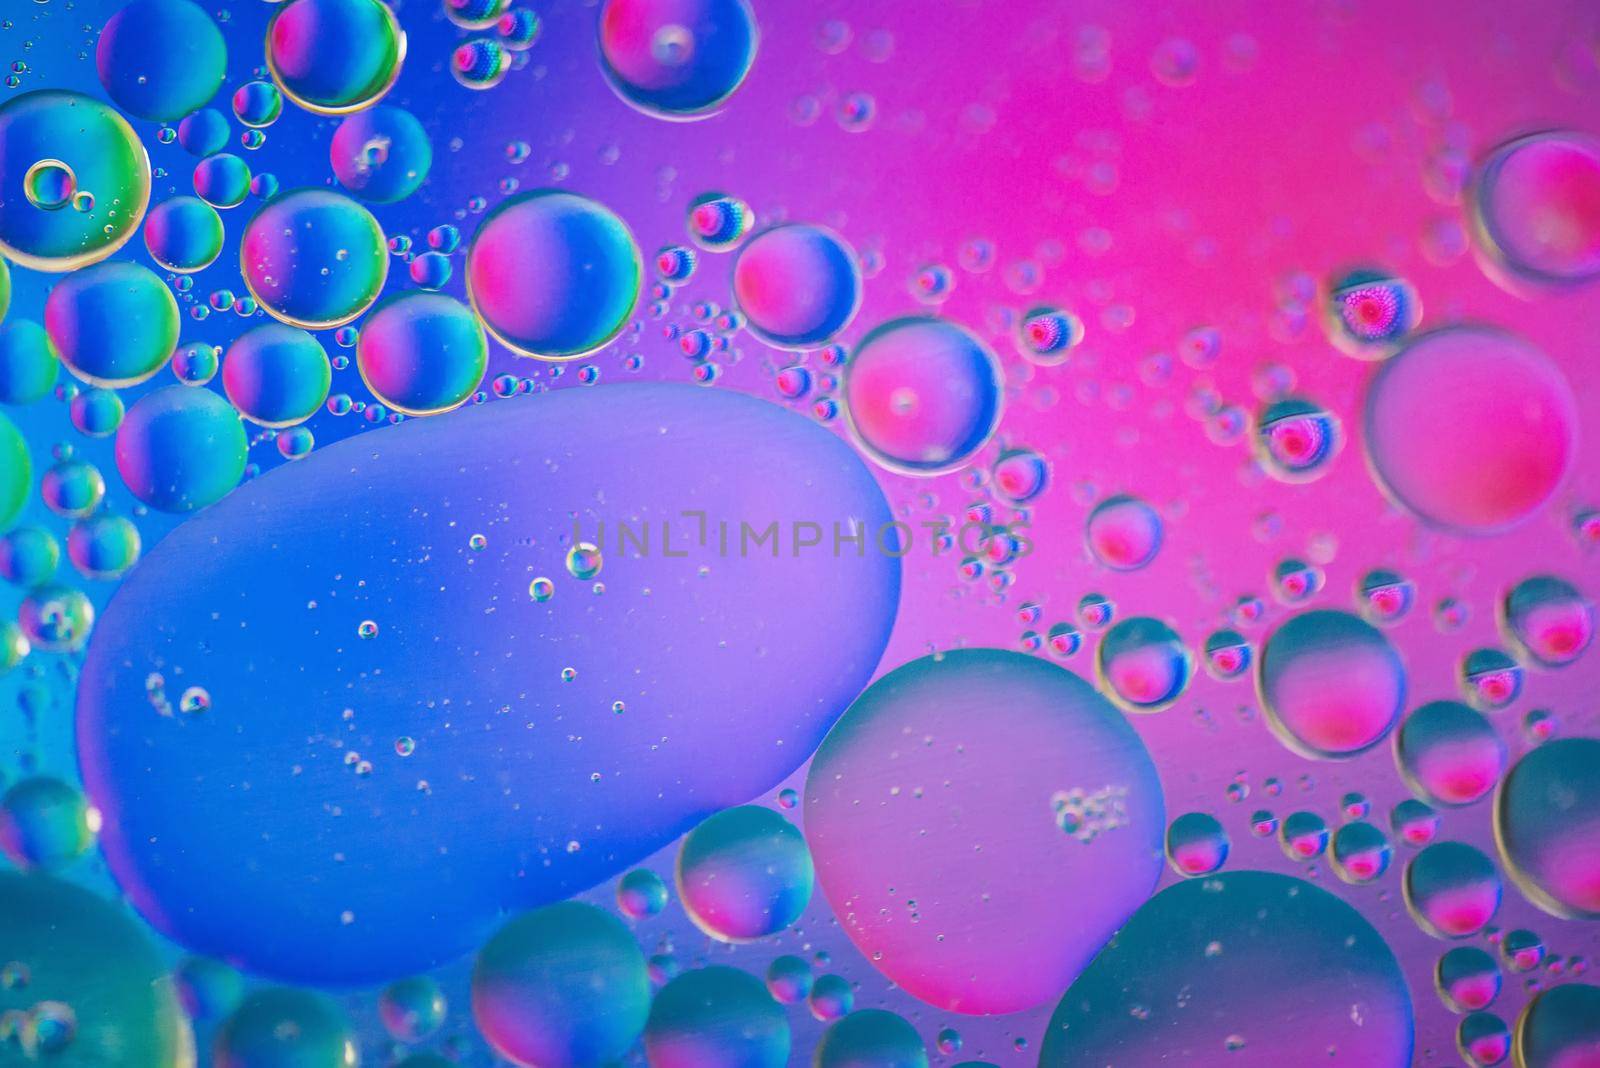 Oil drops in water. Defocused abstract psychedelic pattern pink and blue image. Abstract background with colorful gradient colors.